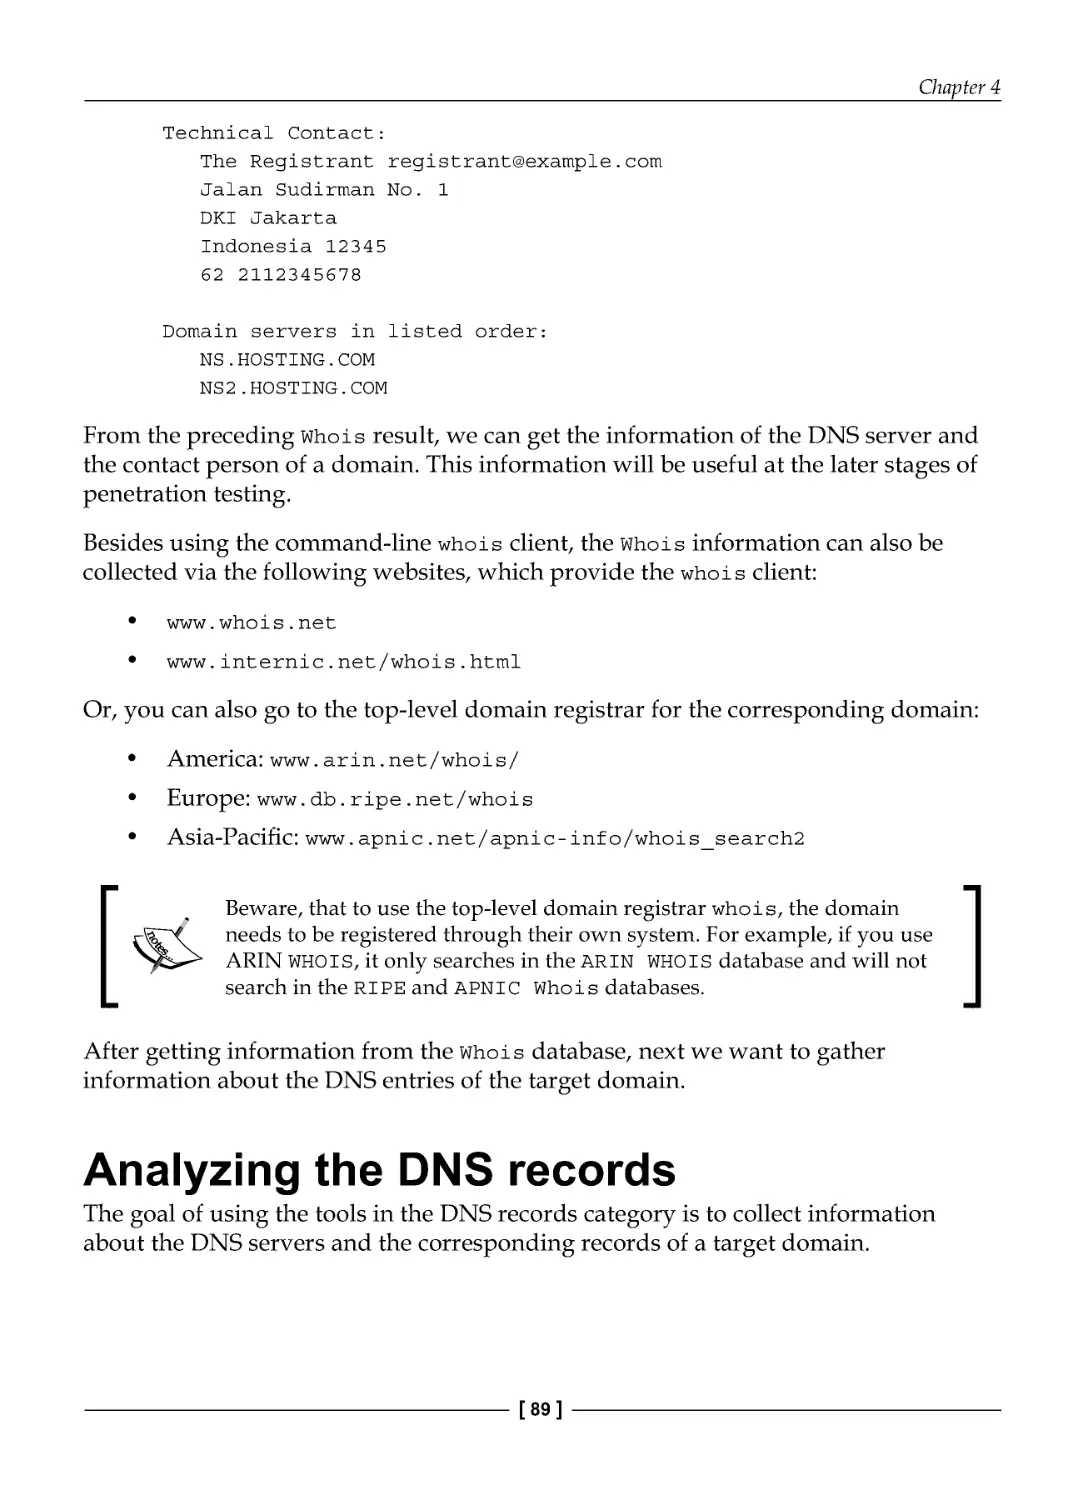 Analyzing the DNS records